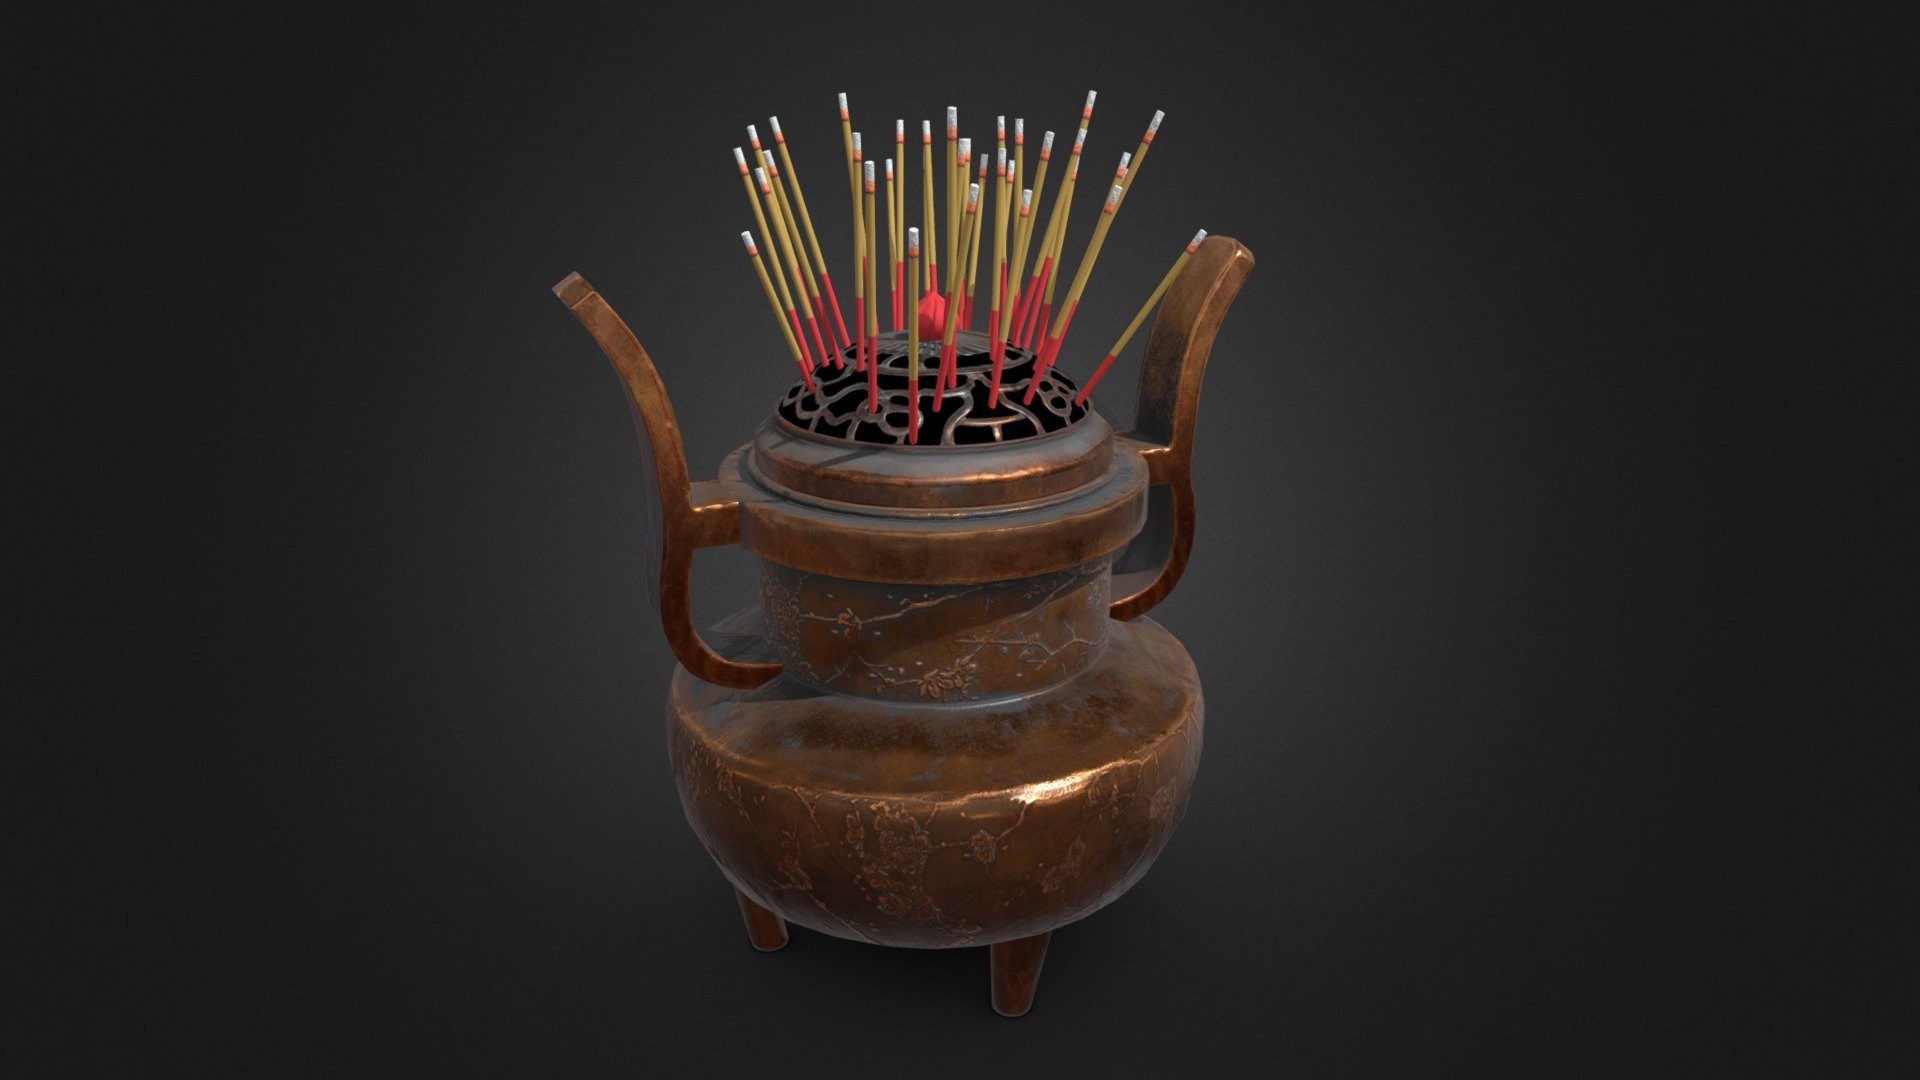 Game ready Incense asset for your project!

ArtStation: https://www.artstation.com/artwork/BmXw19
YouTube Showcase: https://www.youtube.com/watch?v=t0S6IHg78oU&amp;feature=emb_title - Japanese Incense - Buy Royalty Free 3D model by johnteo 3d model